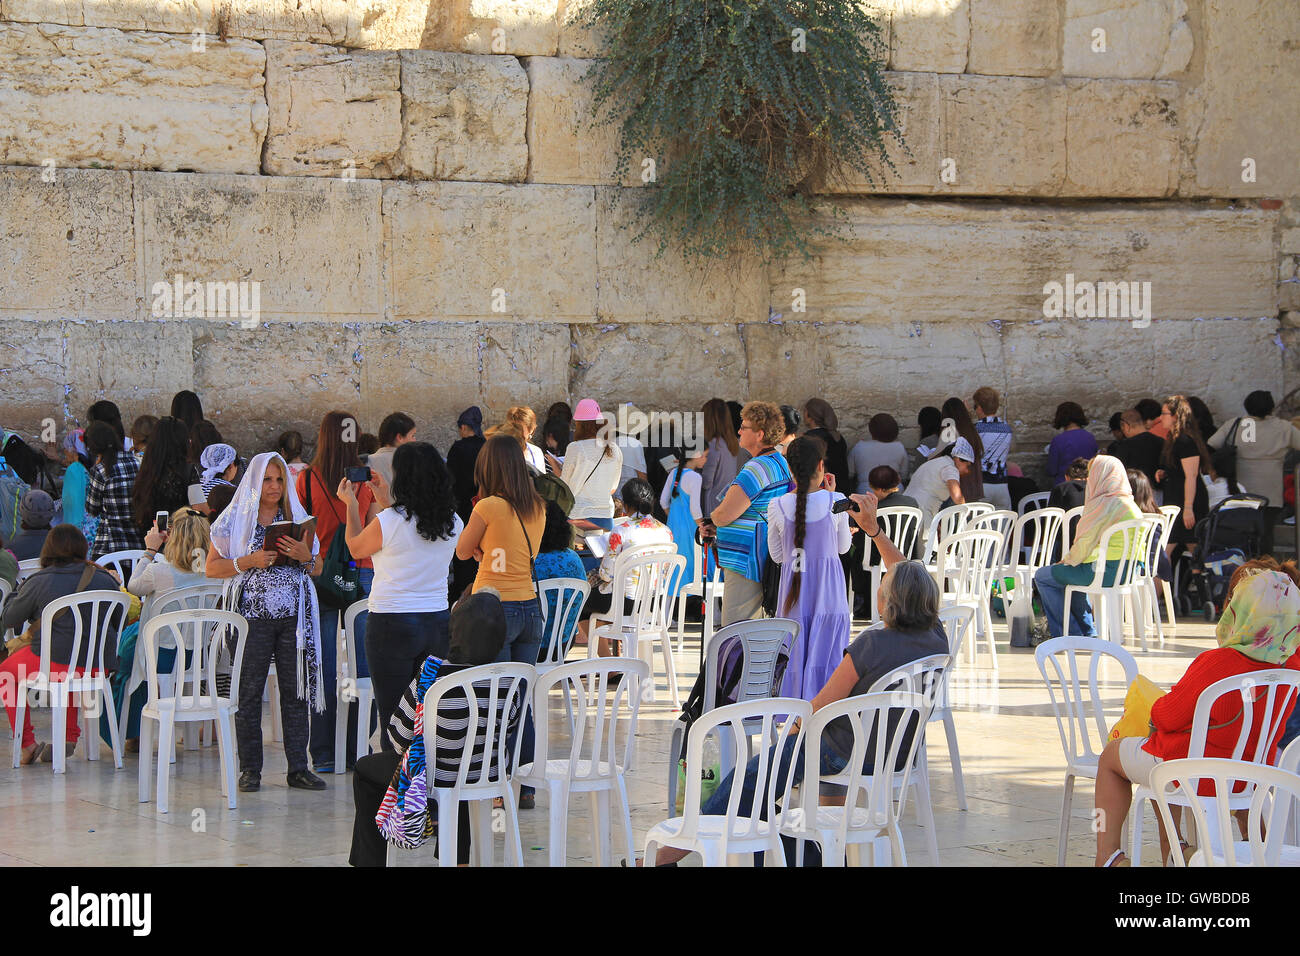 Women praying at the womens side of the Western Wailing Wall which is also known as the Kotel, the most holy site for Je Stock Photo